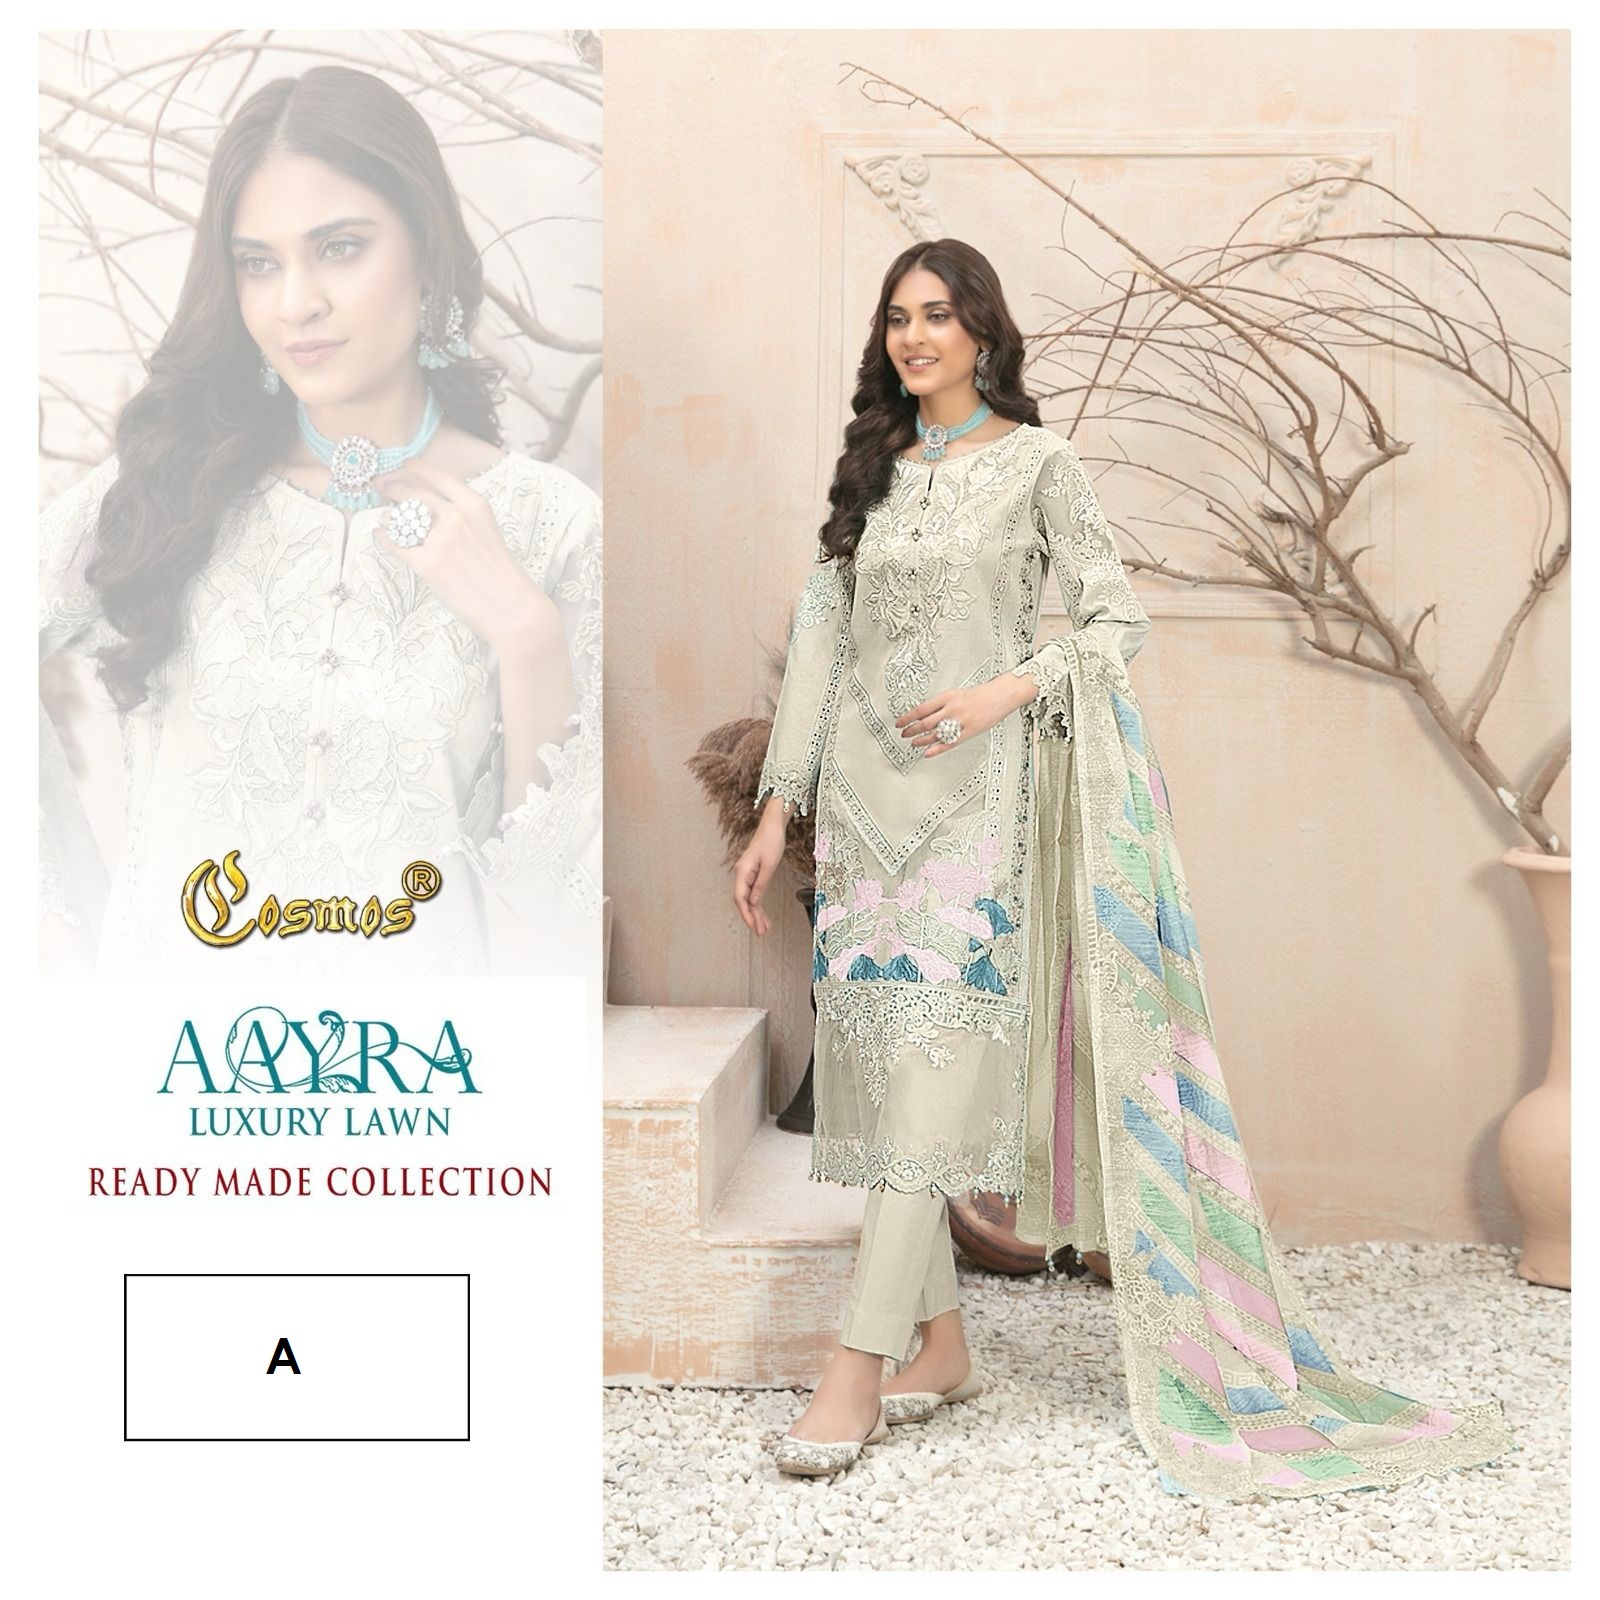 COSMOS AAYRA LUXURY LAWN A READYMADE SUITS